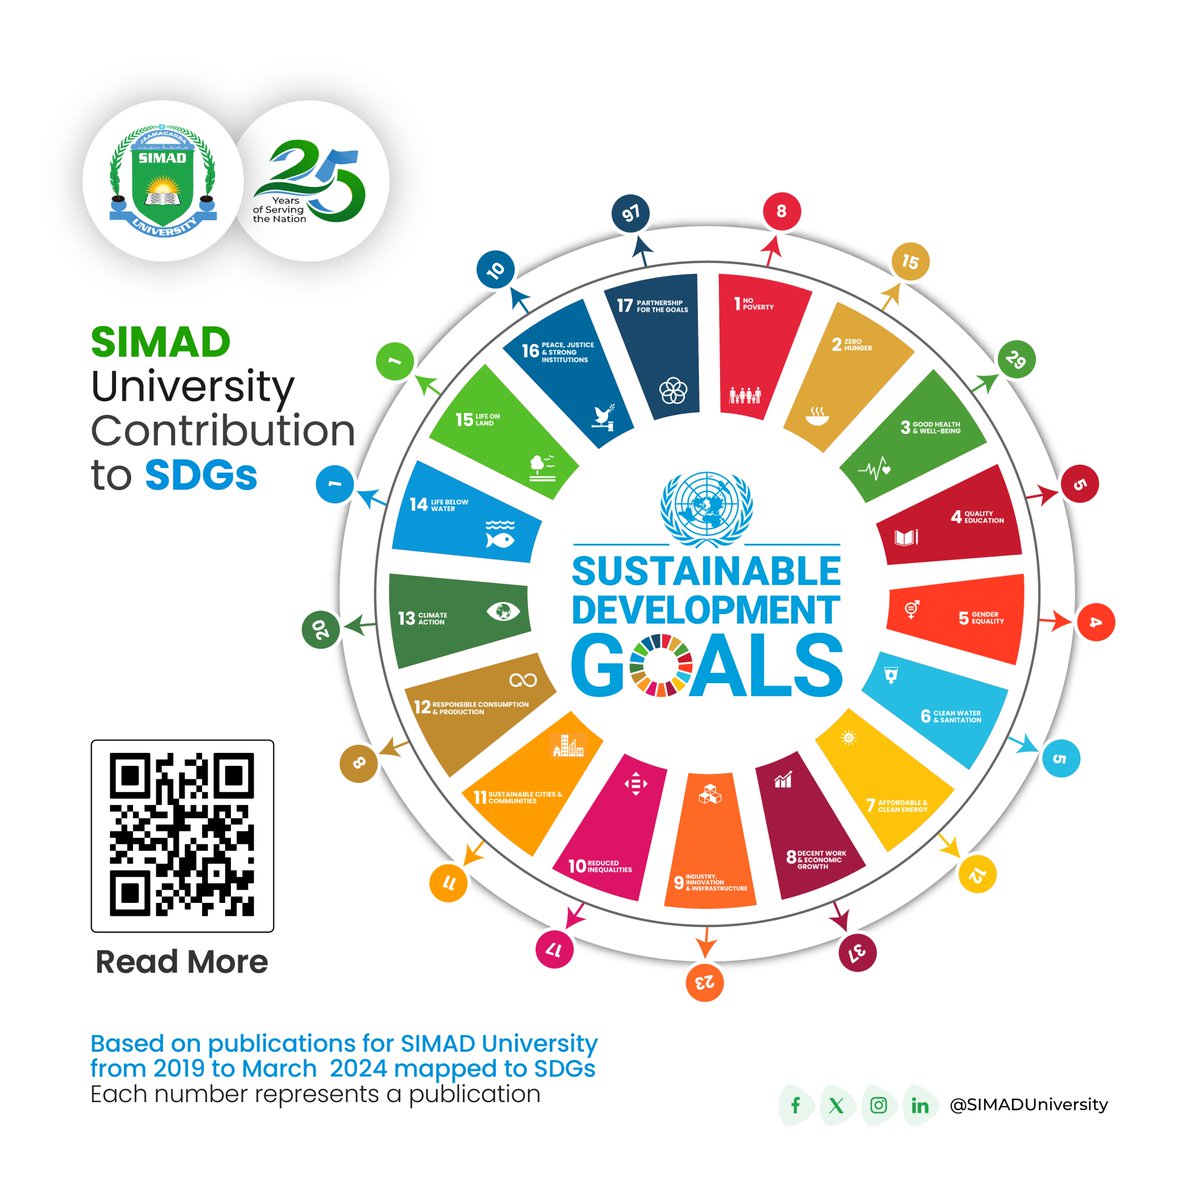 According to Elsevier SDG data mapping, SIMAD University is the only institution in Somalia whose research efforts align with all 17 Sustainable Development Goals (SDGs). This achievement reflects our commitment to academic excellence and making a positive contribution to global…